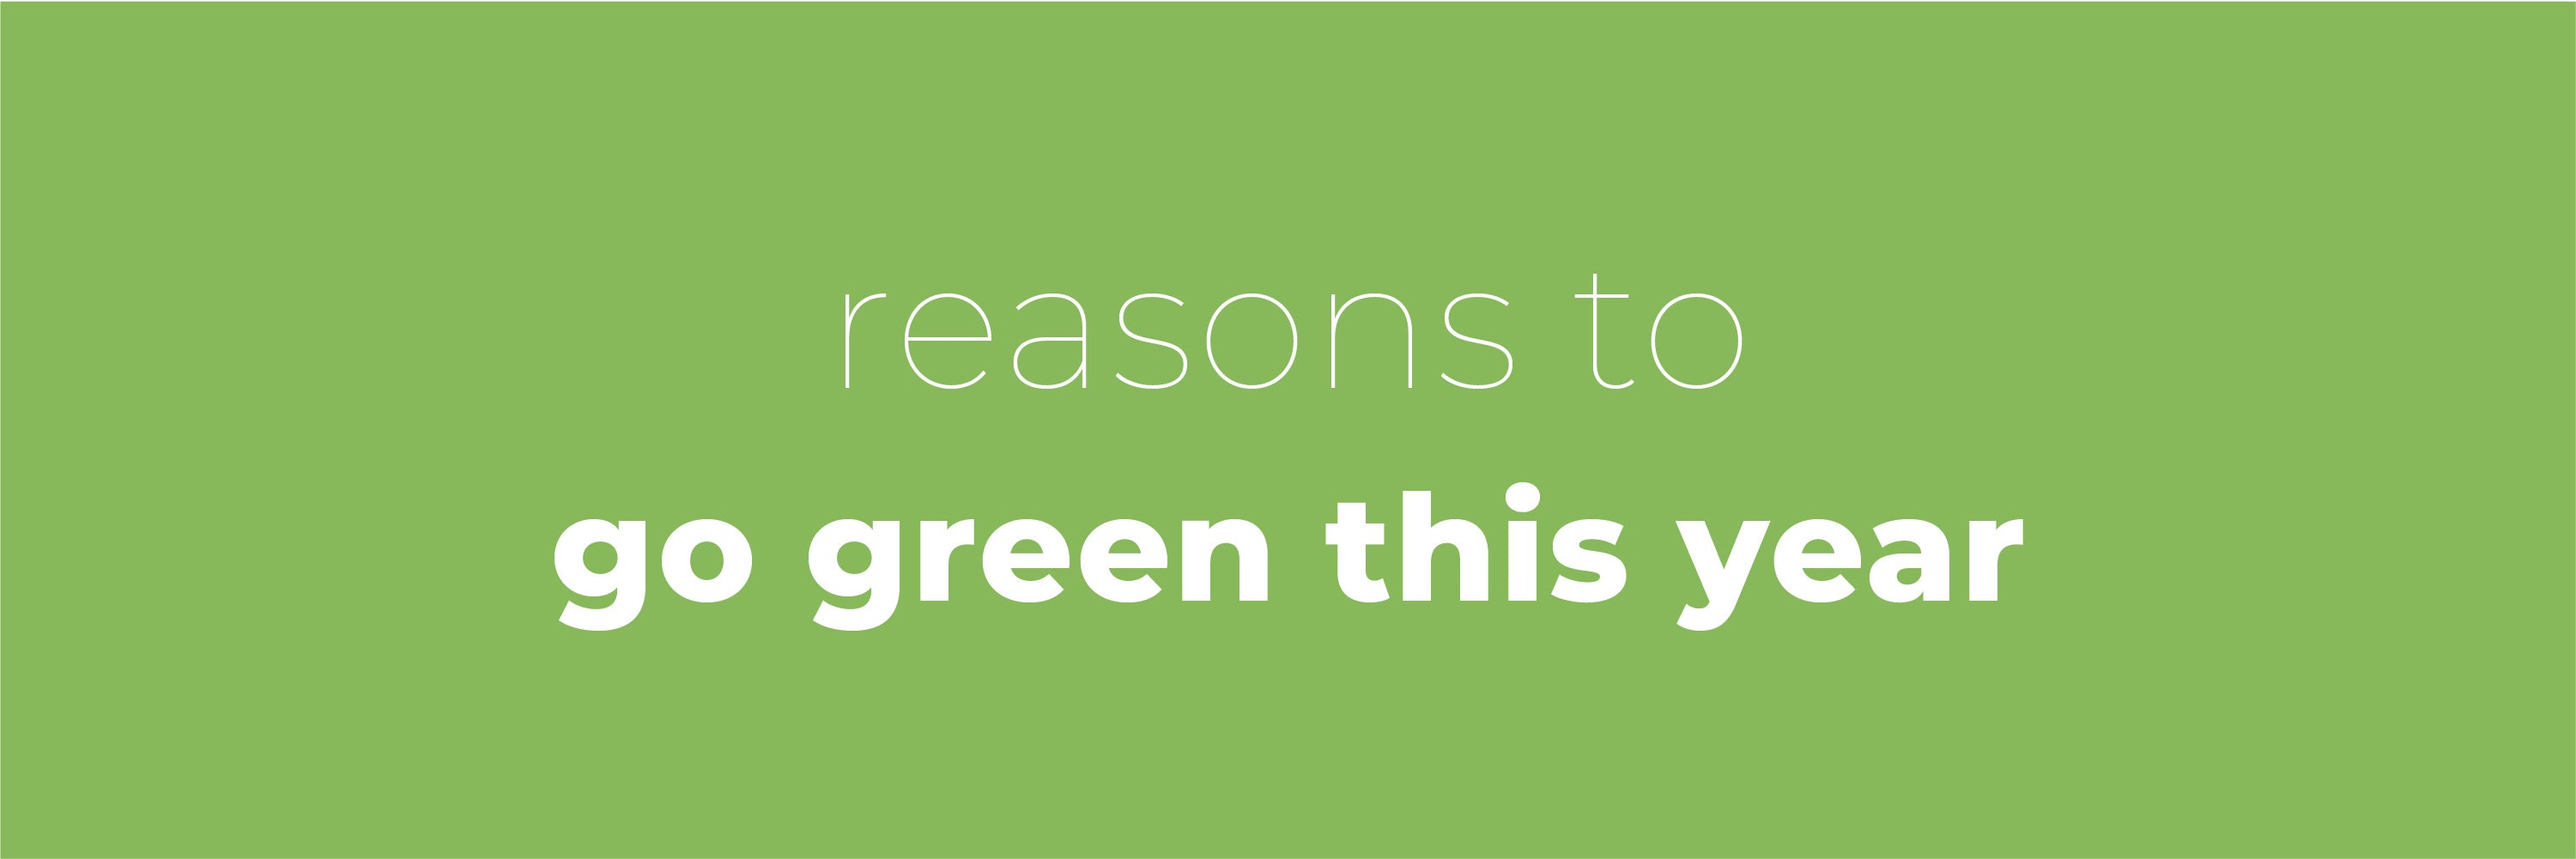 Reasons to go green this year